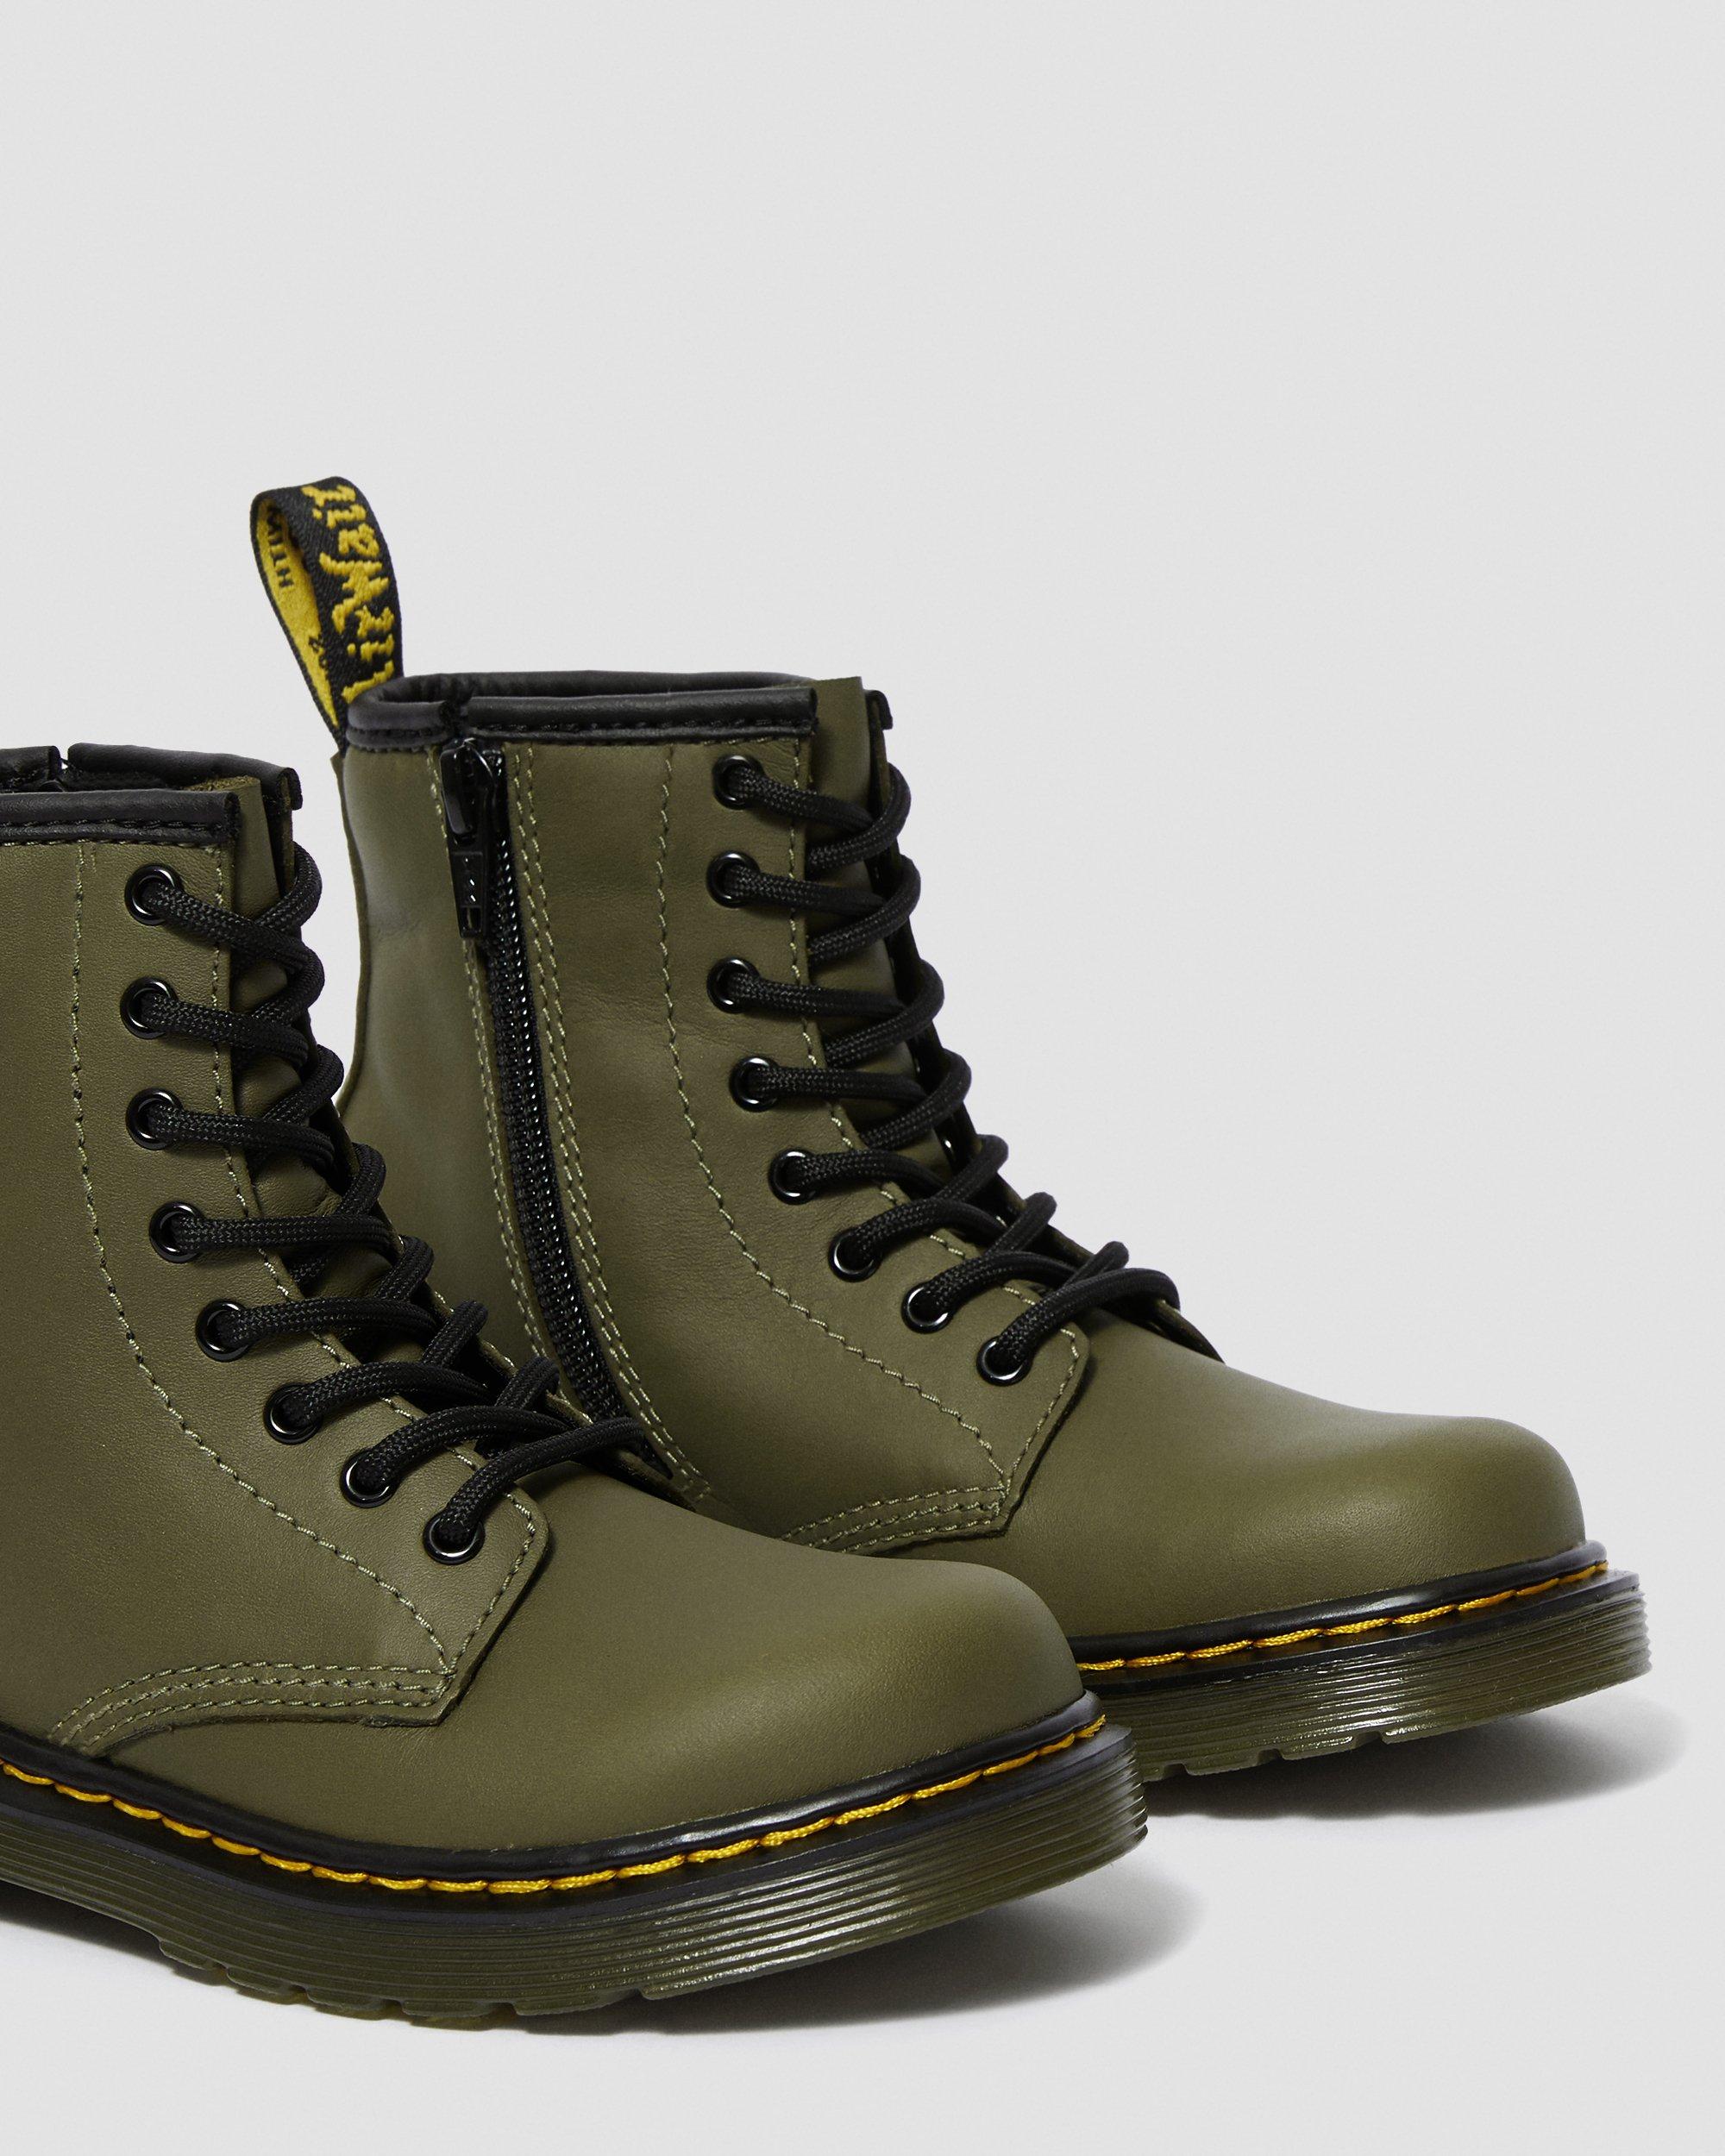 Martens | Olive Boots Lace 1460 Junior Up Dr. in Leather